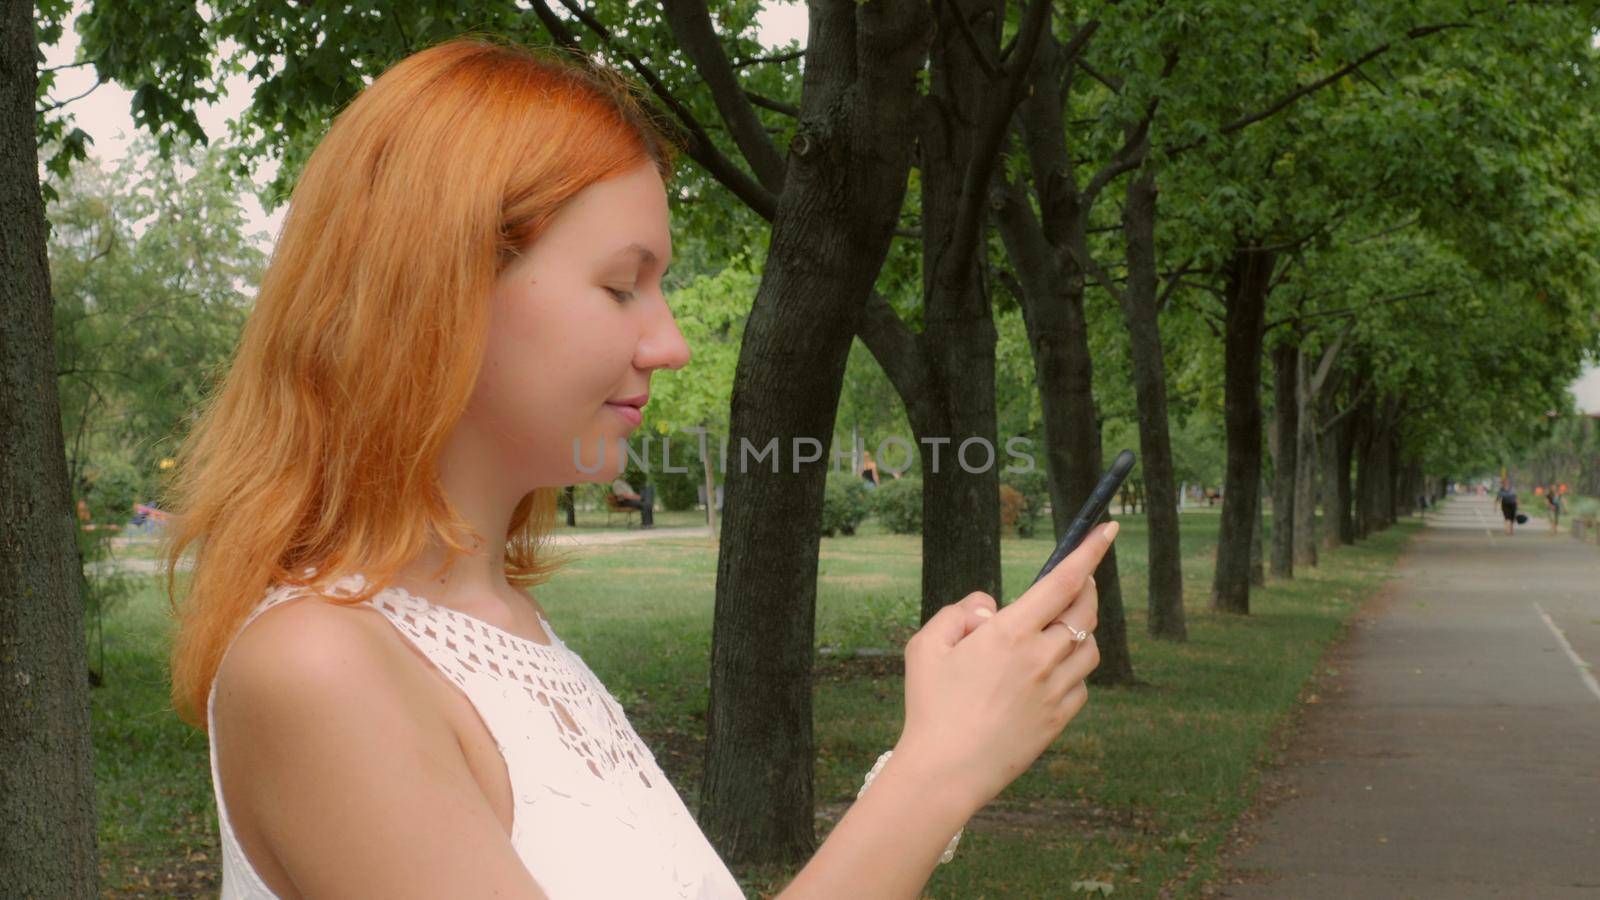 Redheaded woman texting on mobile phone. by VadosLoginov